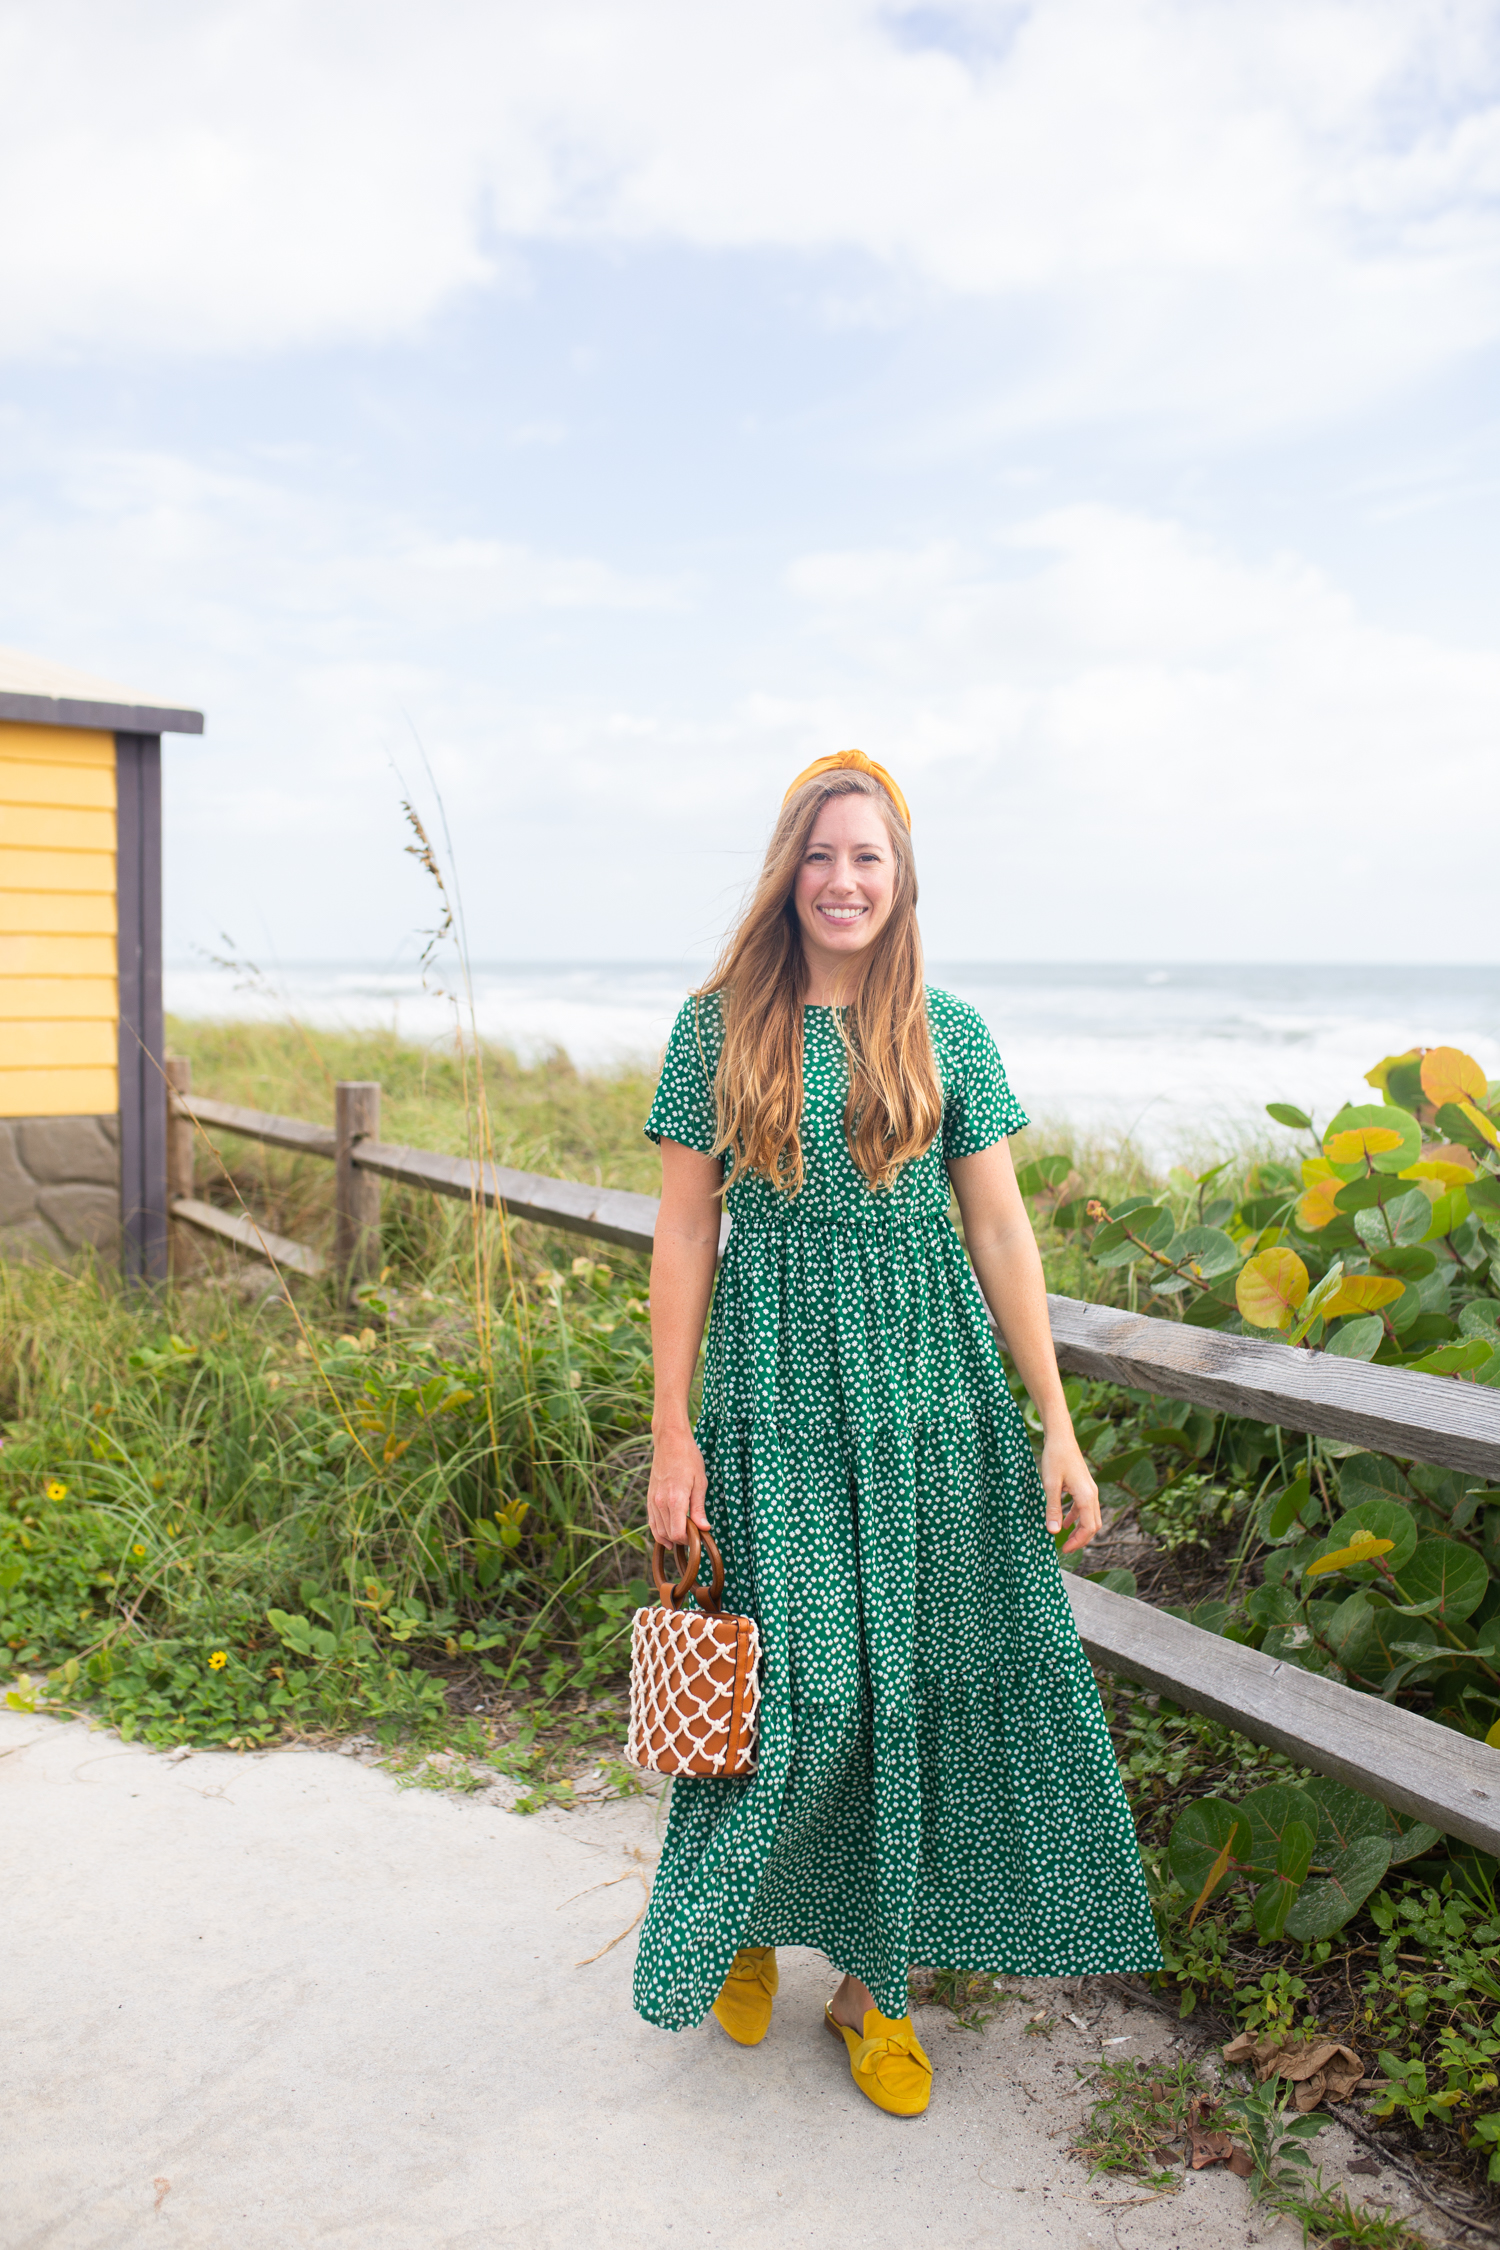 What to Wear This Fall When It's Still Warm Out / Fall Dress Outfit / Fall Dress Casual / Green Maxi Dress / Emerald Dress / Yellow Accessories / Cute Fall Dresses / Autumn Outfits - Sunshine Style, A Florida Fashion and Lifestyle Blog by Katie